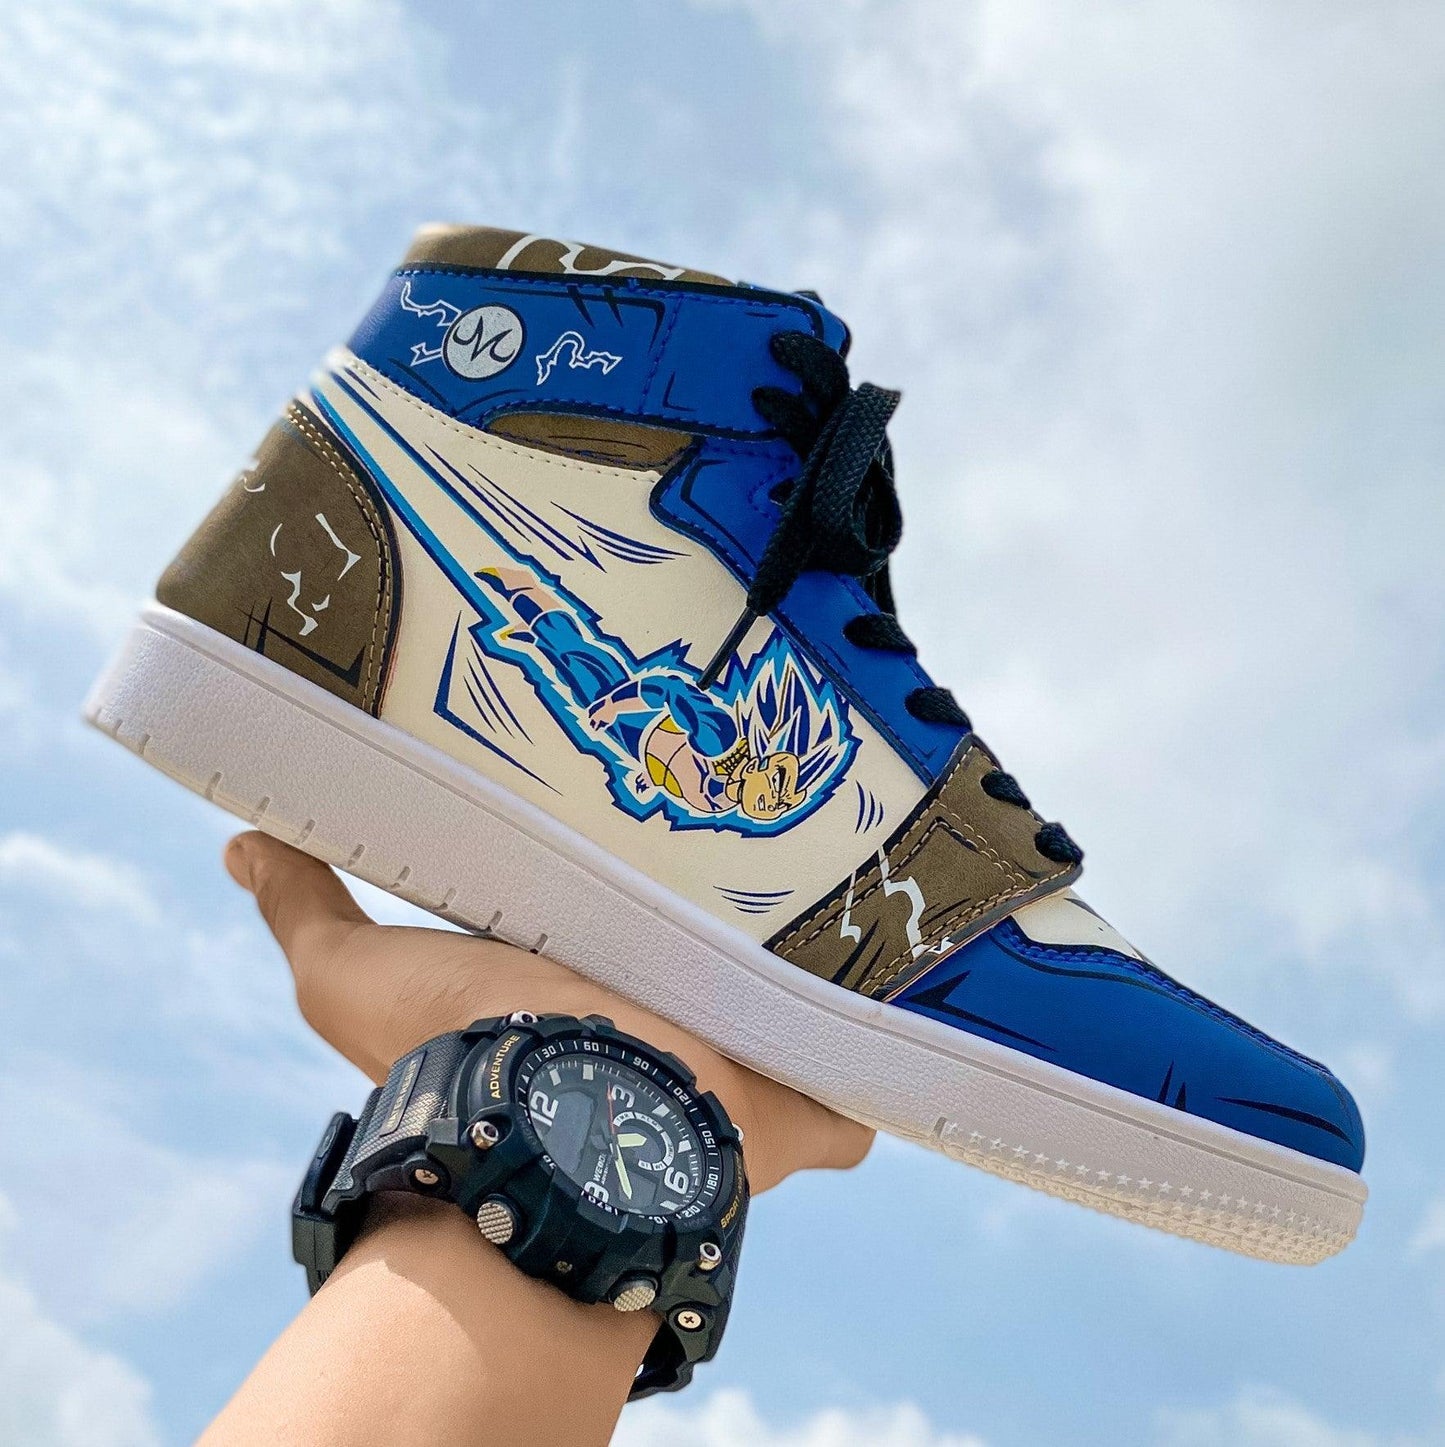 (Out of Stock) Dragon Ball Vegeta Blue High Top Shoes / Sneakers - AnimeGo Store